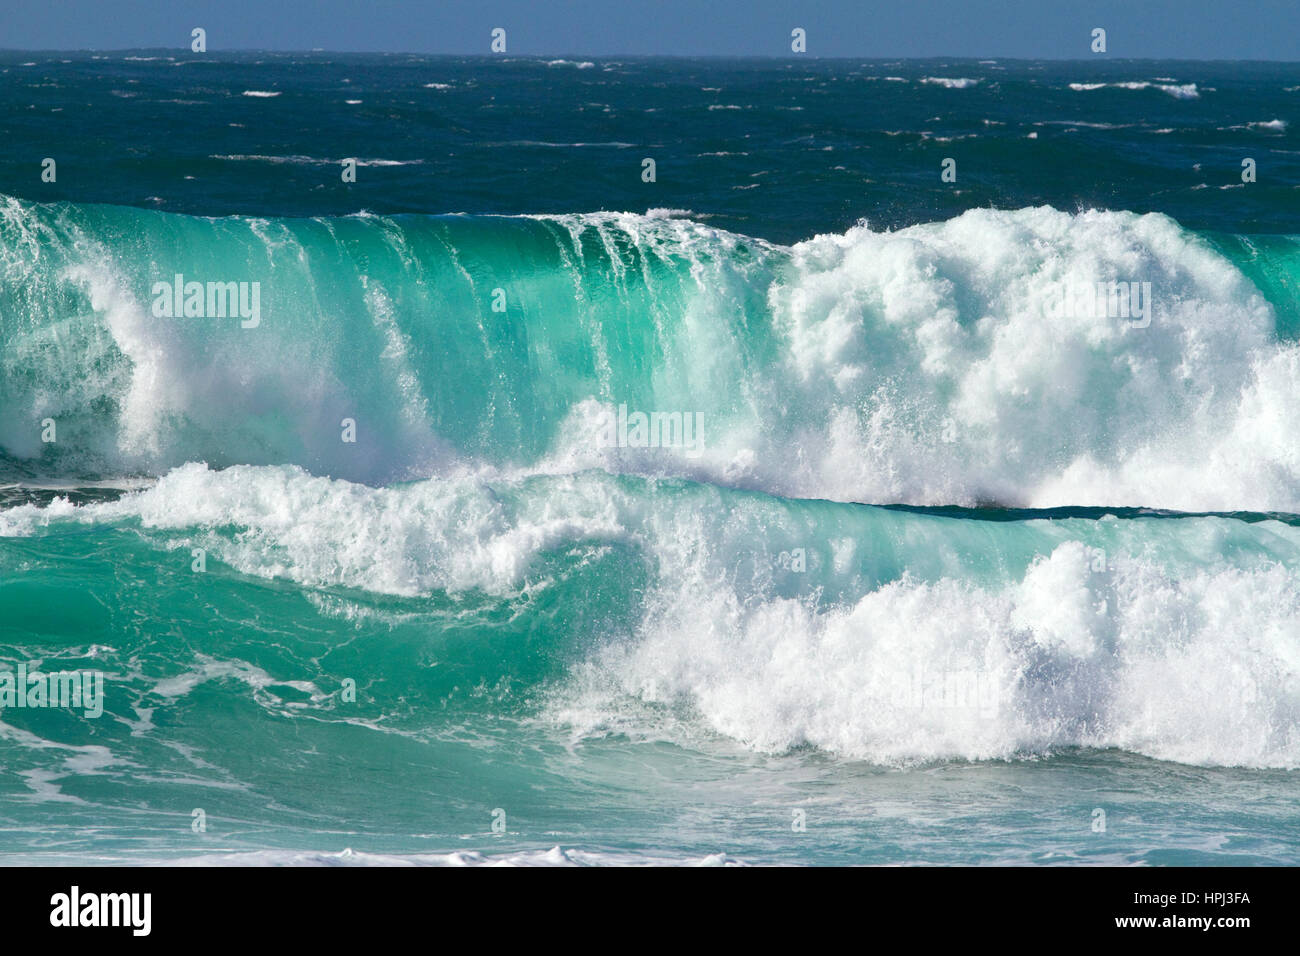 Pacific ocean waves and surf off the coast of Monteray, California, USA. Stock Photo